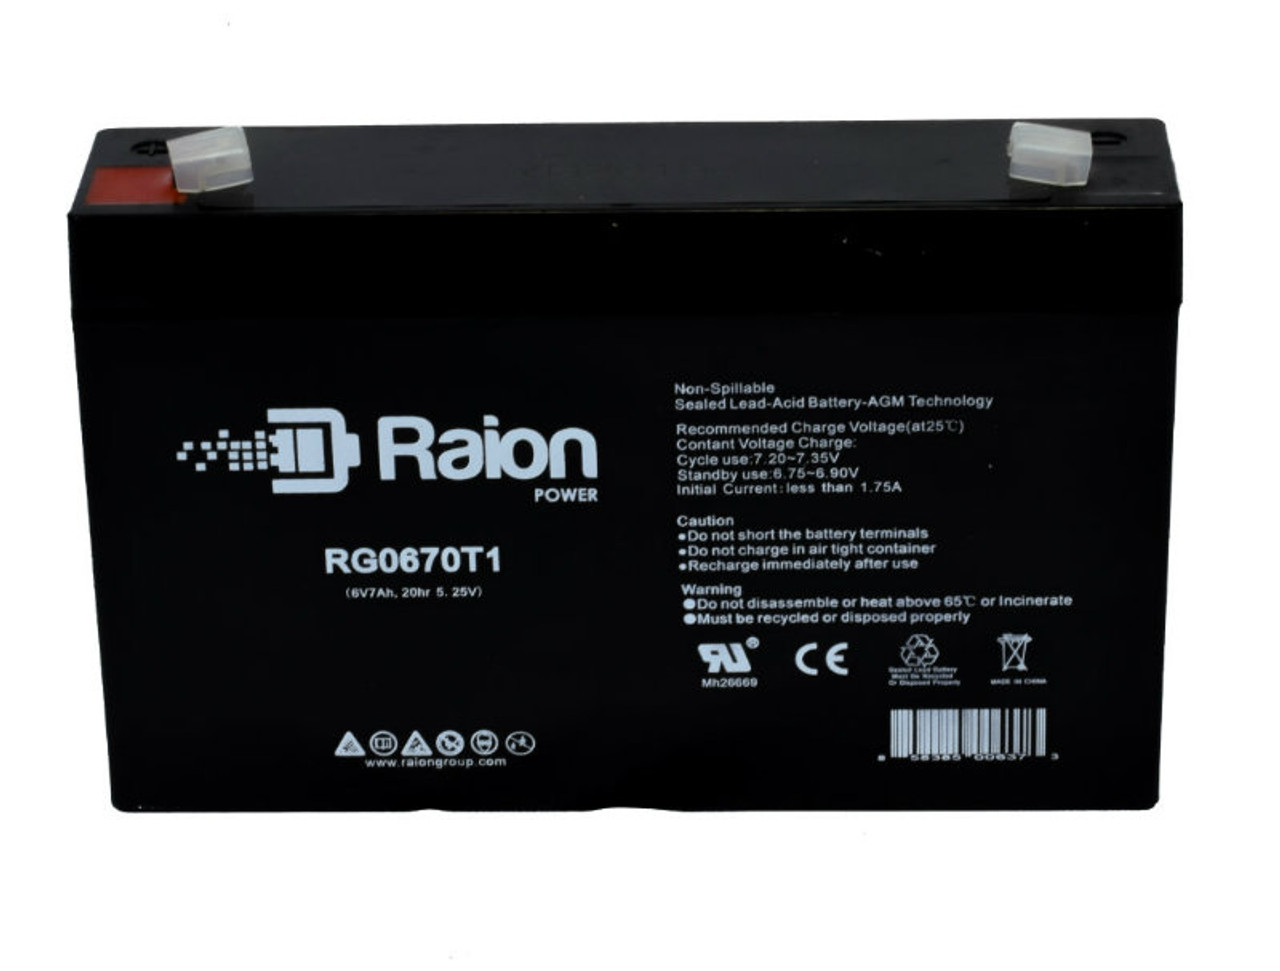 Raion Power RG0670T1 Replacement Battery Cartridge for GOULD SP2204 Blood Flow Monitor